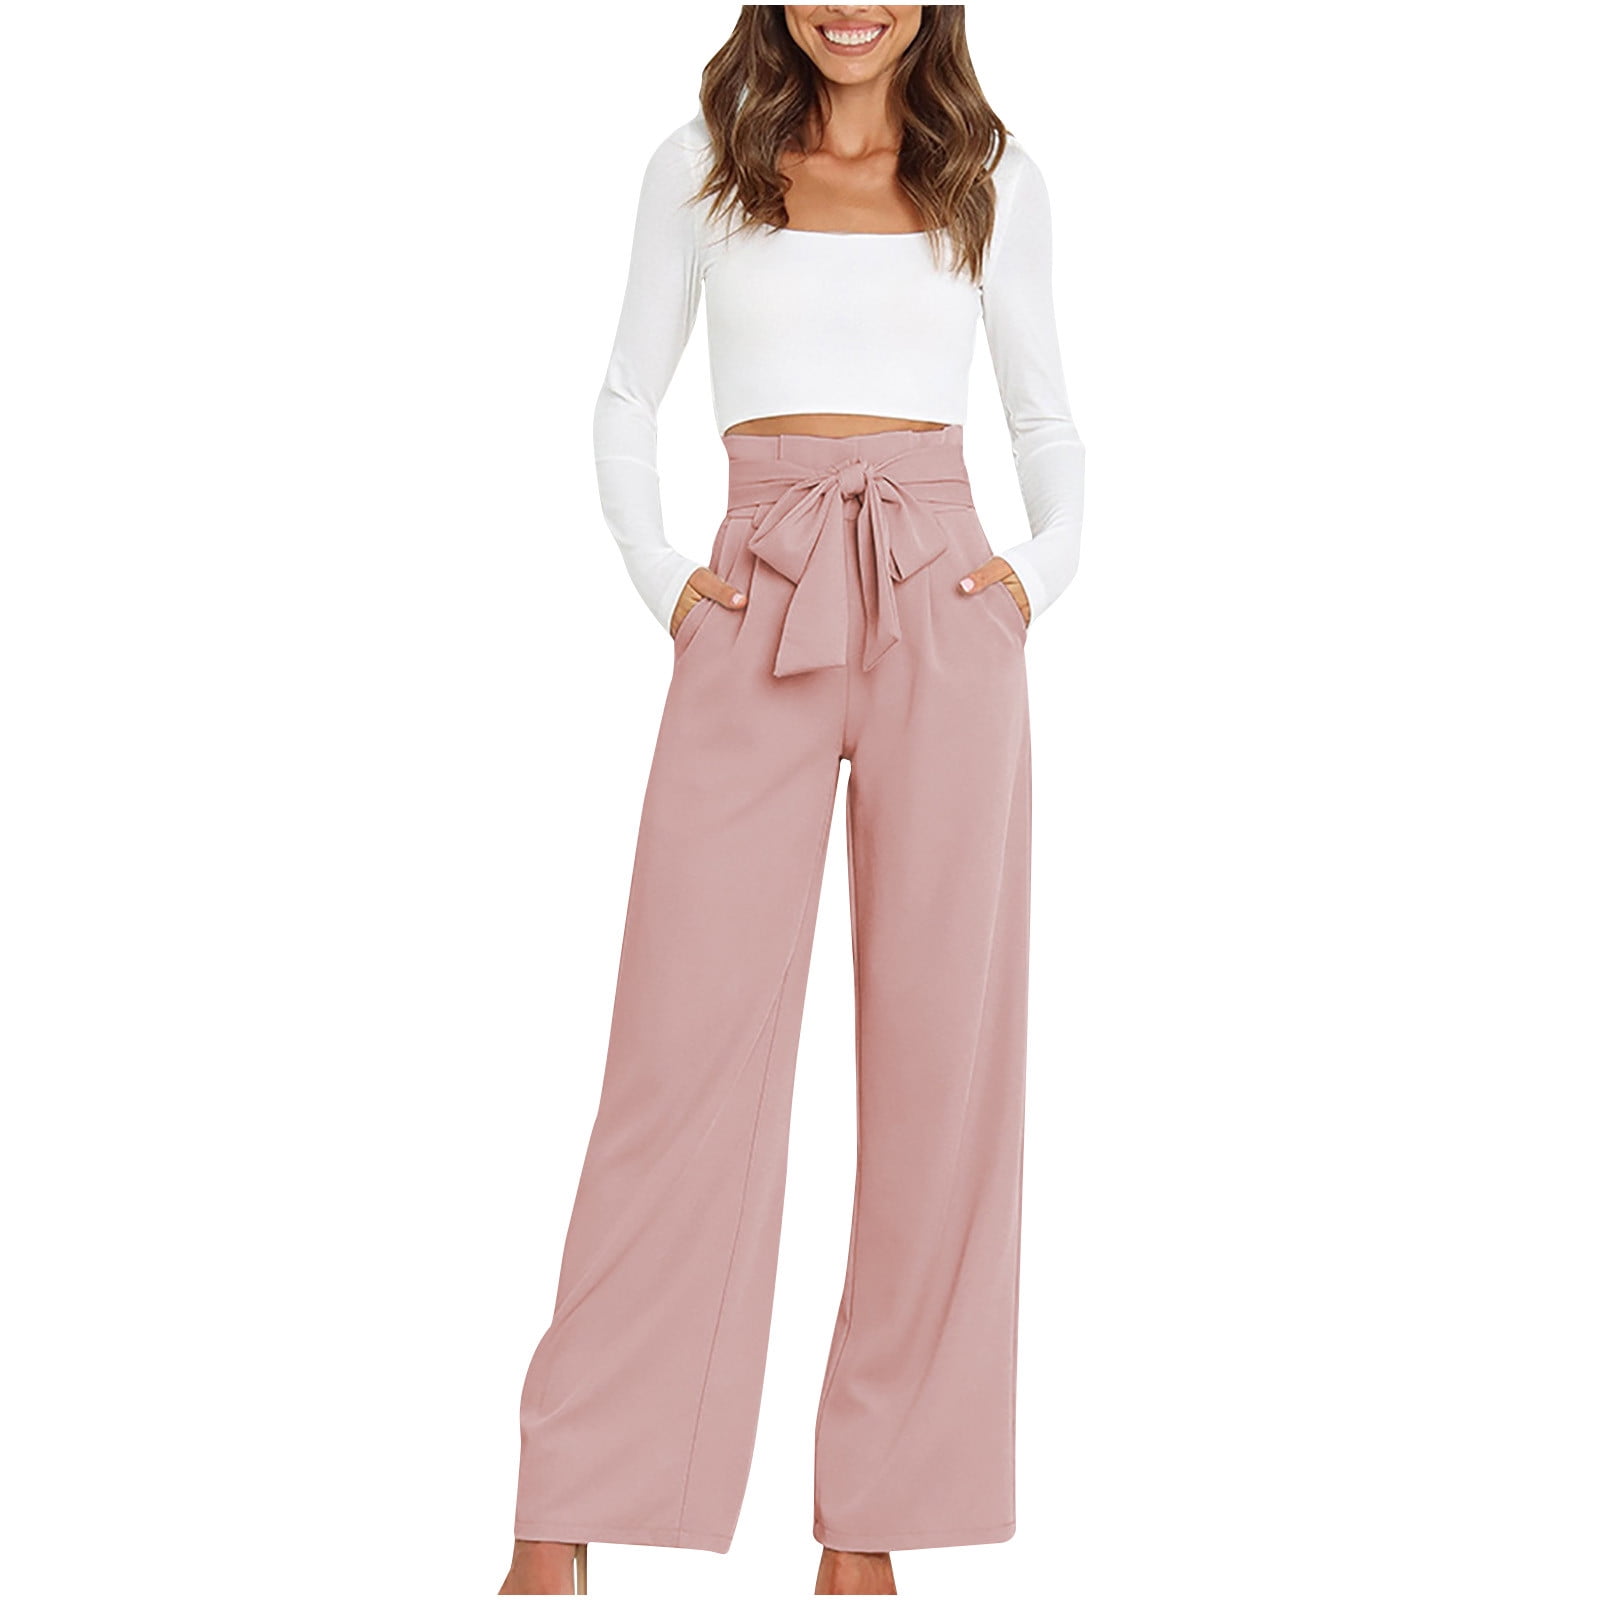 JWZUY Casual Solid High Waist Tie Front Wide Leg with Pockets Office Flowy  Pants Pink S